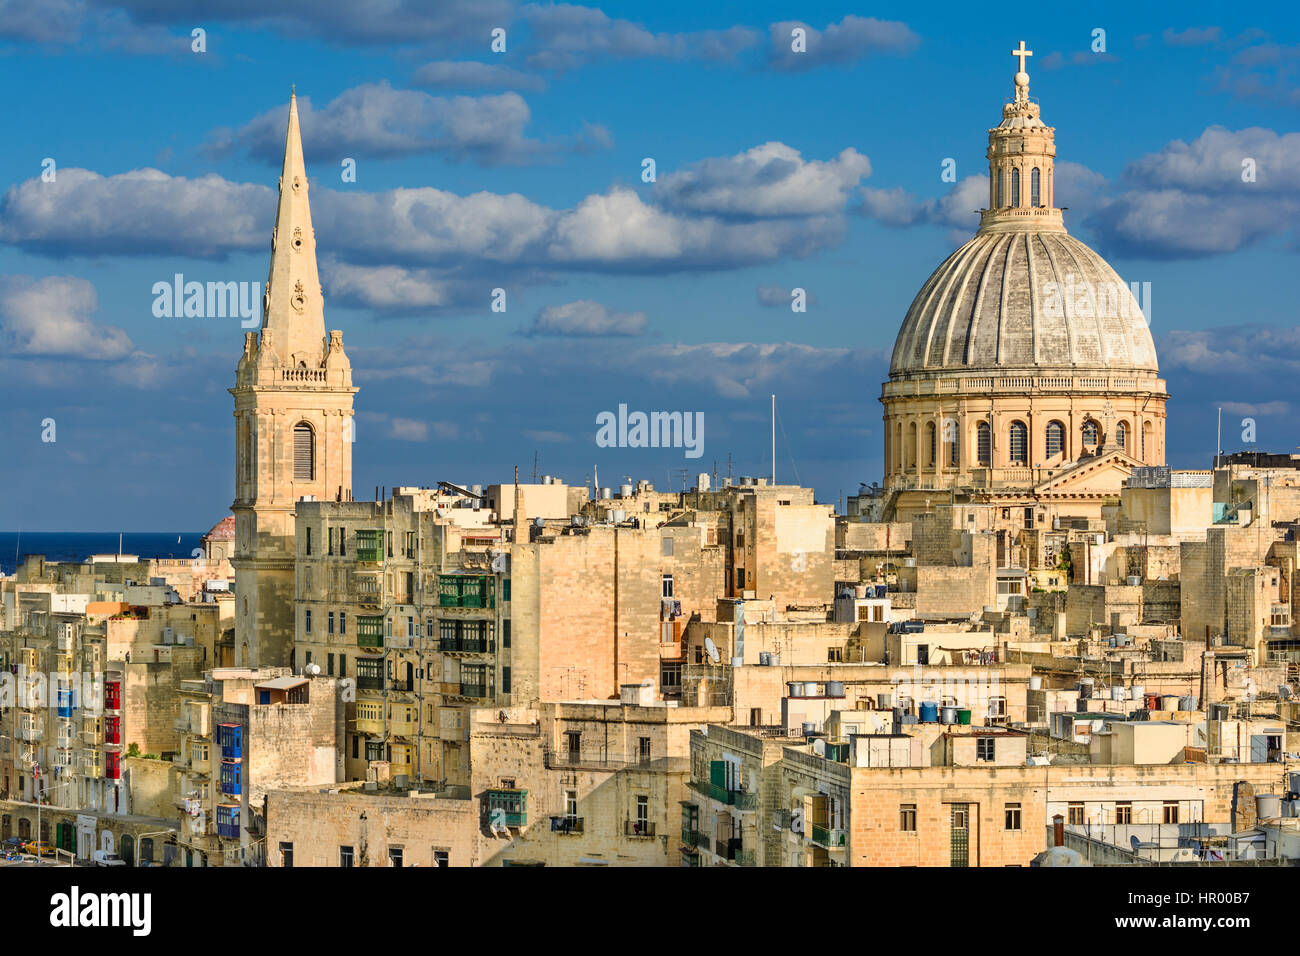 Valetta overview. View of a church dome over the roofs of Valetta Stock Photo